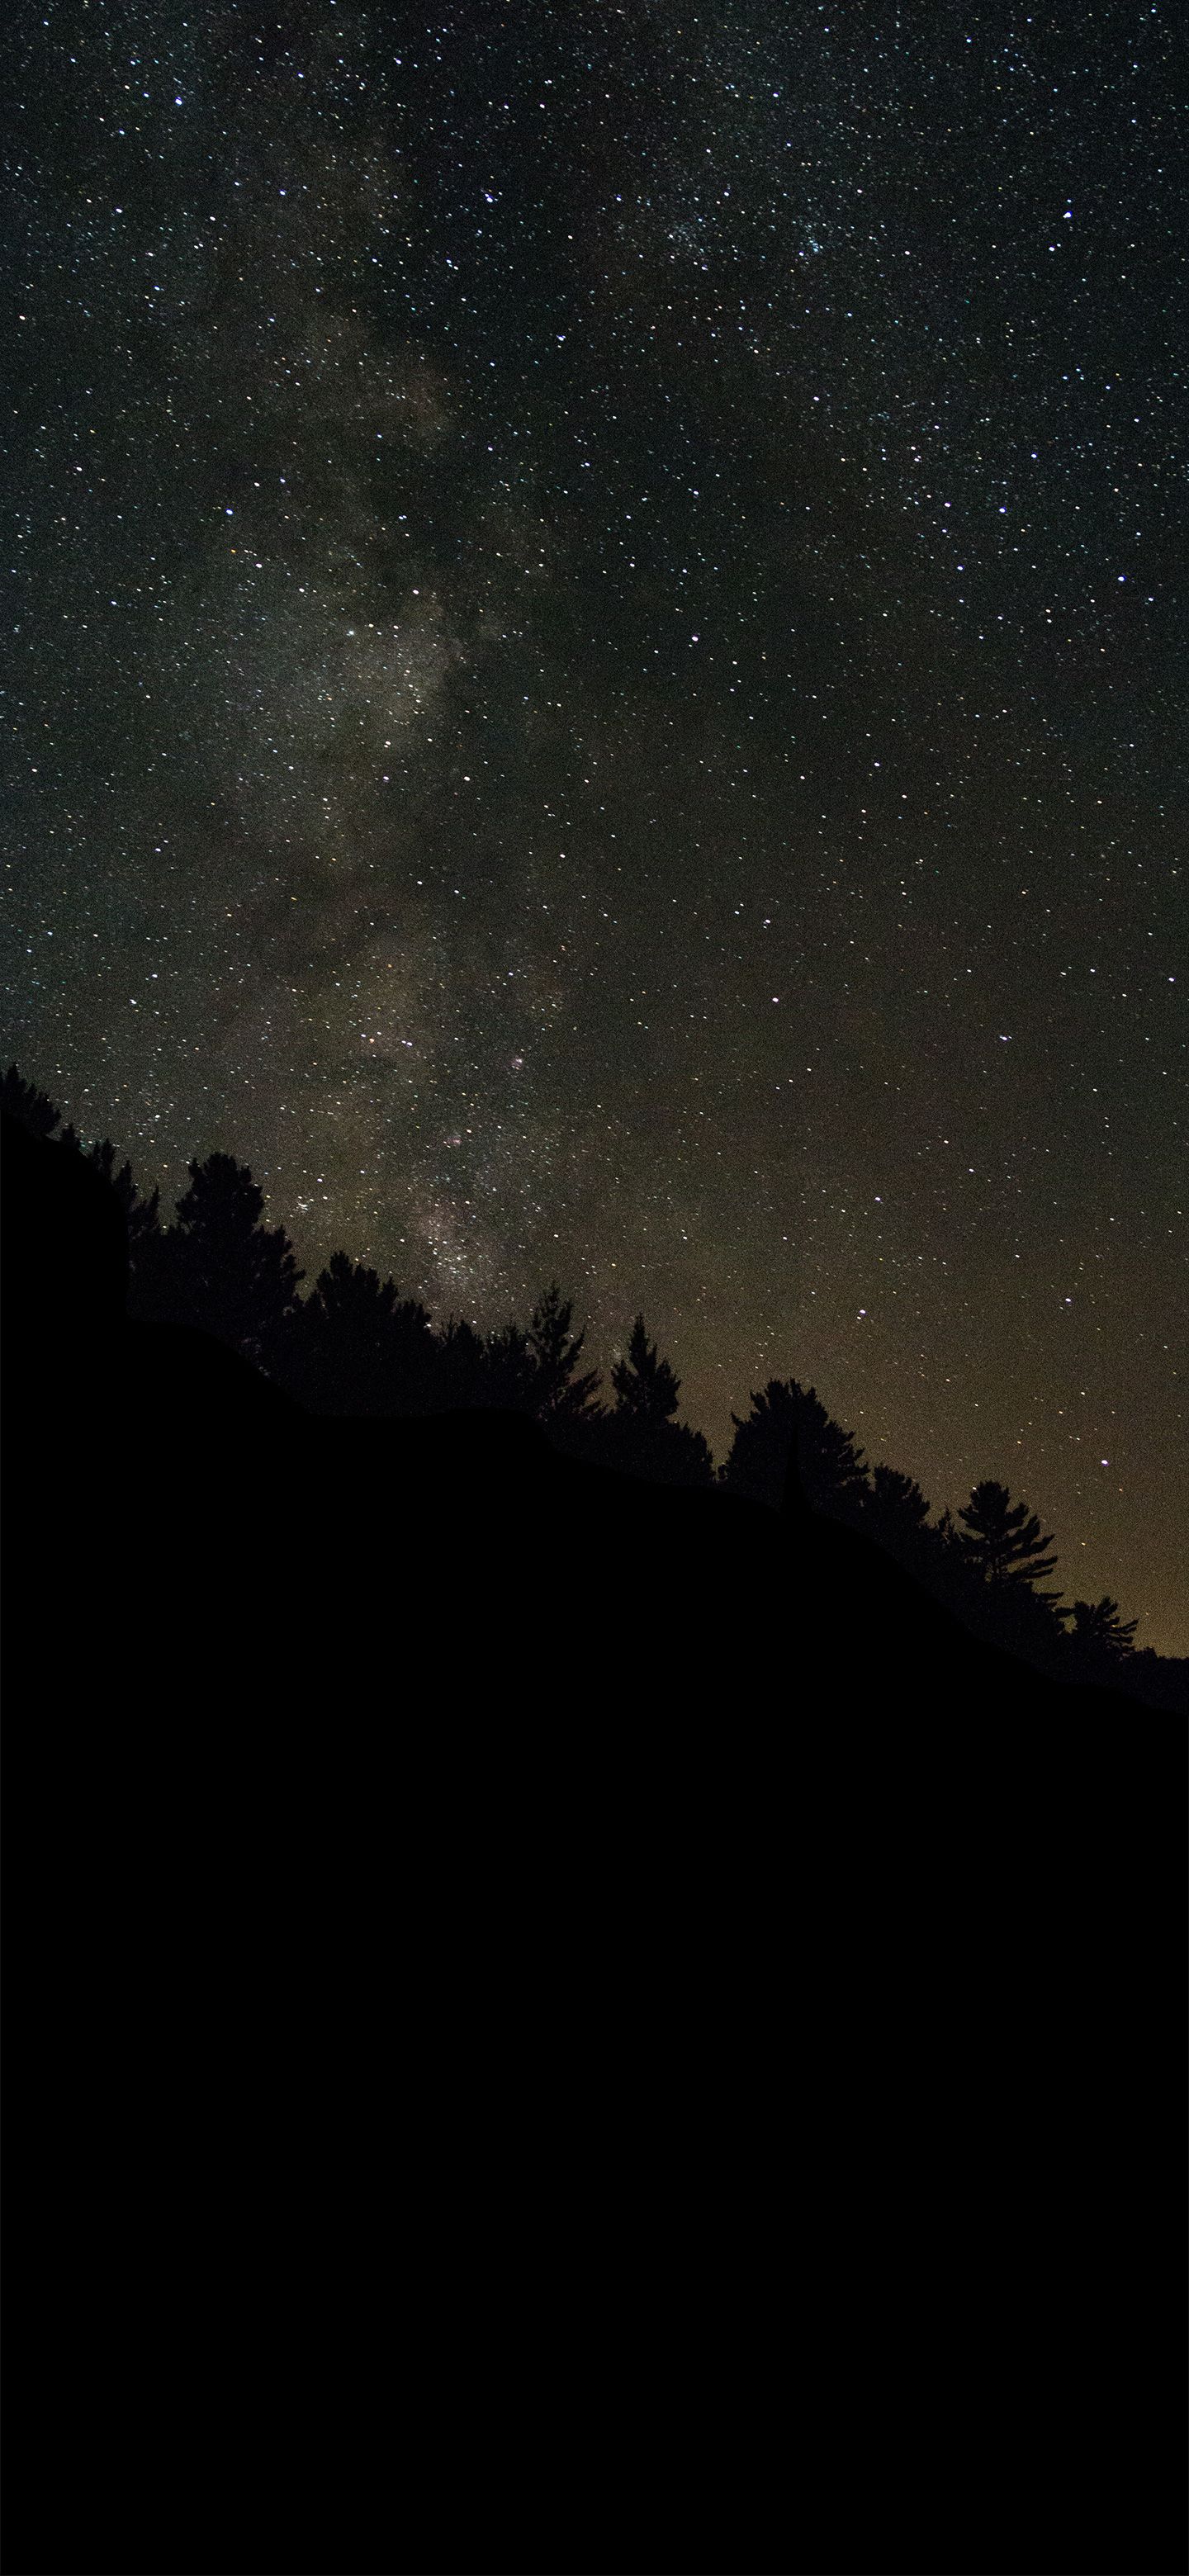 Galaxy over forest Amoled Wallpaper